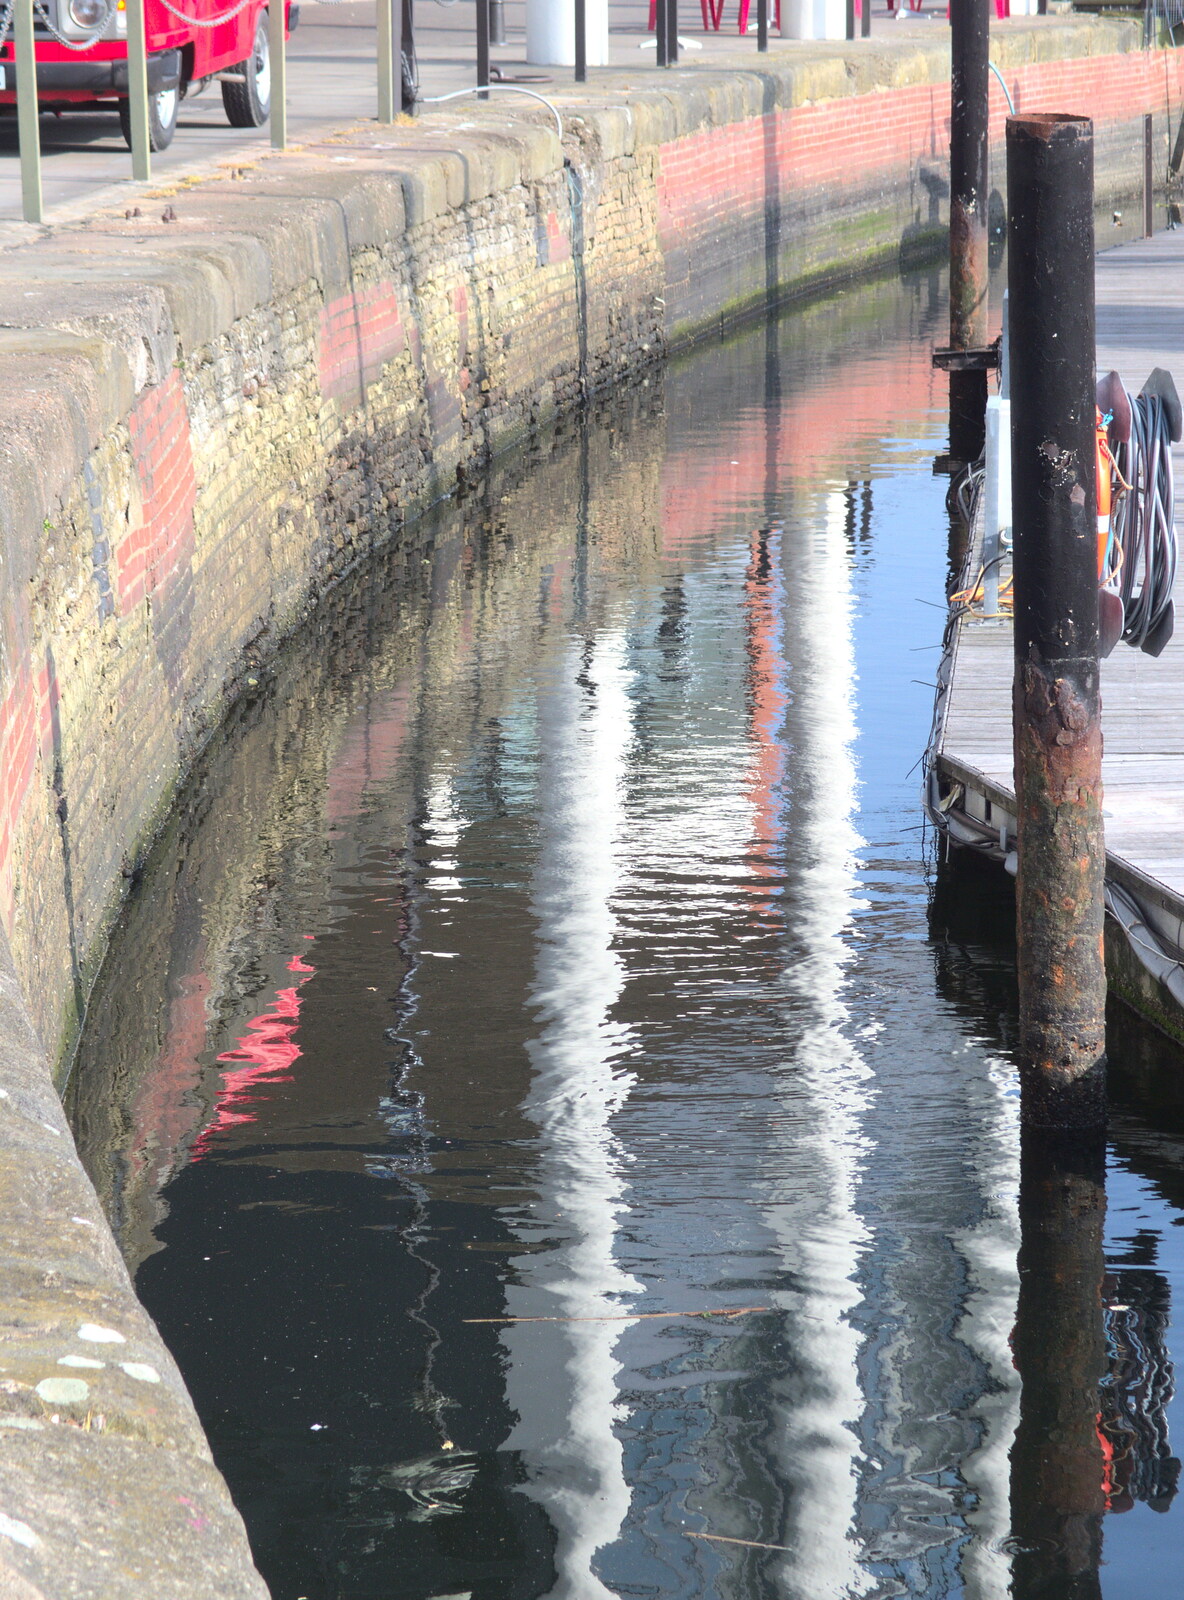 Reflections in the marina from An Unexpected Birthday, Ipswich, Suffolk - 26th May 2018